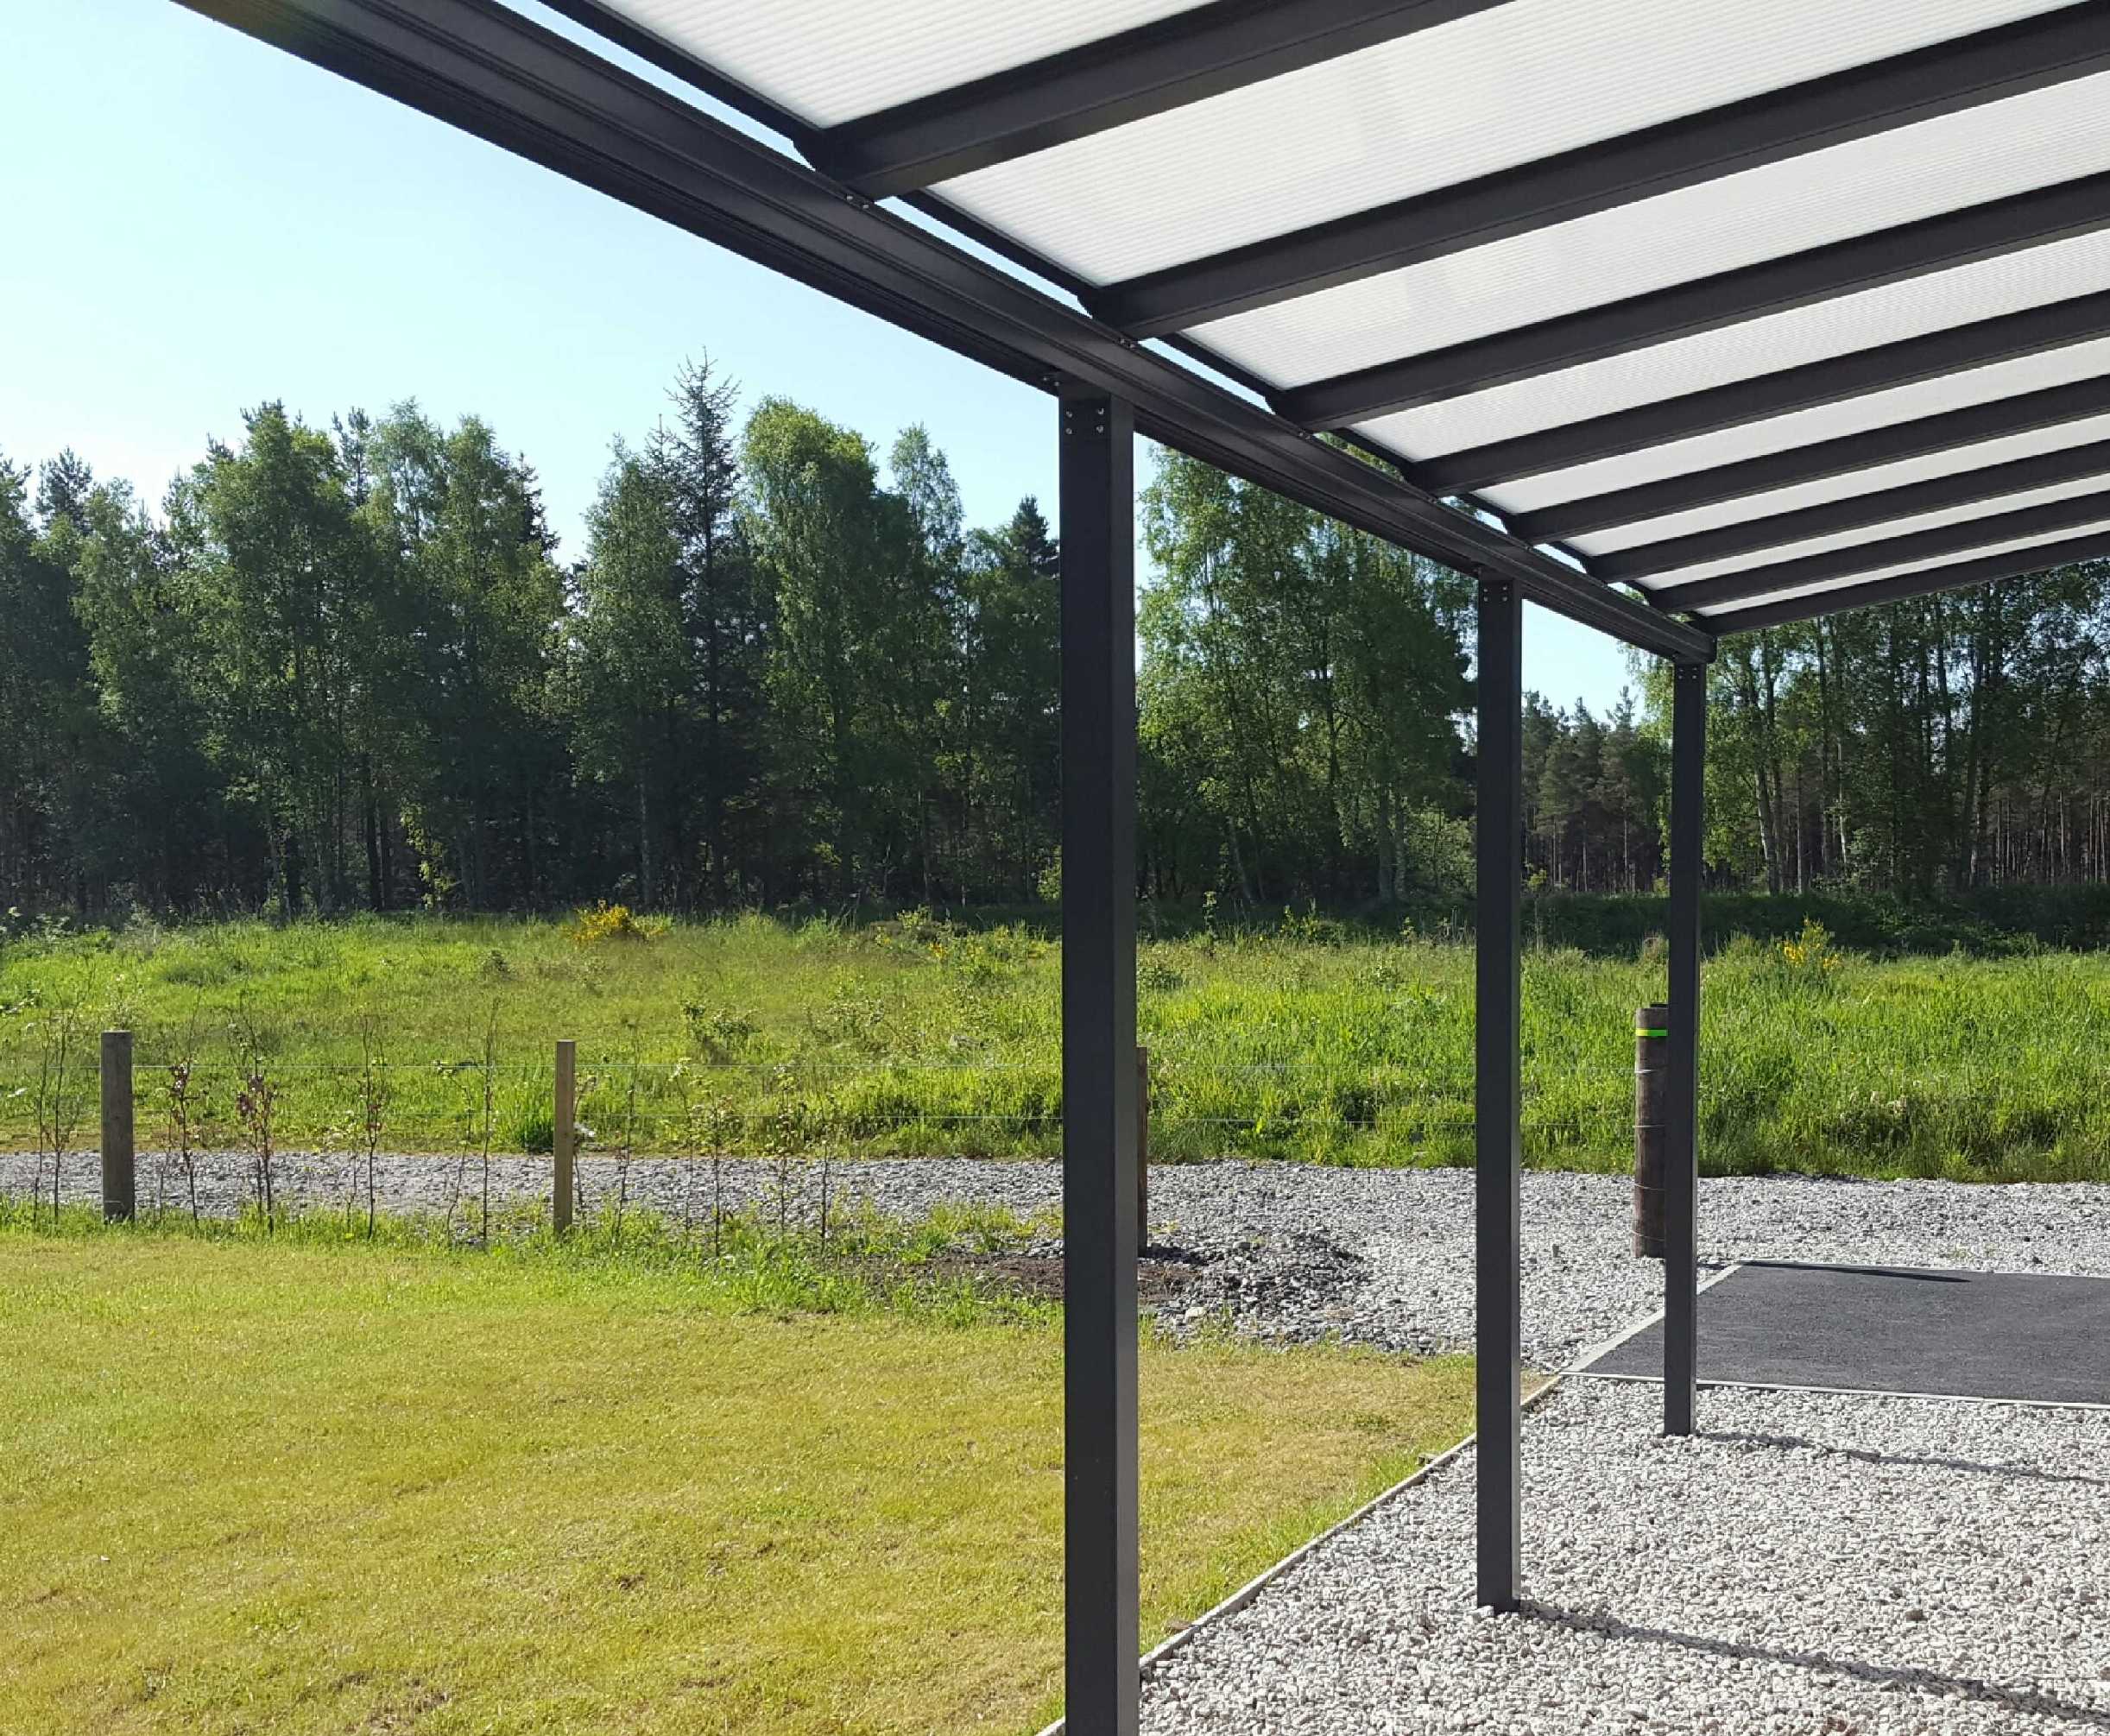 Omega Smart Lean-To Canopy, Anthracite Grey, UNGLAZED for 6mm Glazing - 10.5m (W) x 2.0m (P), (5) Supporting Posts